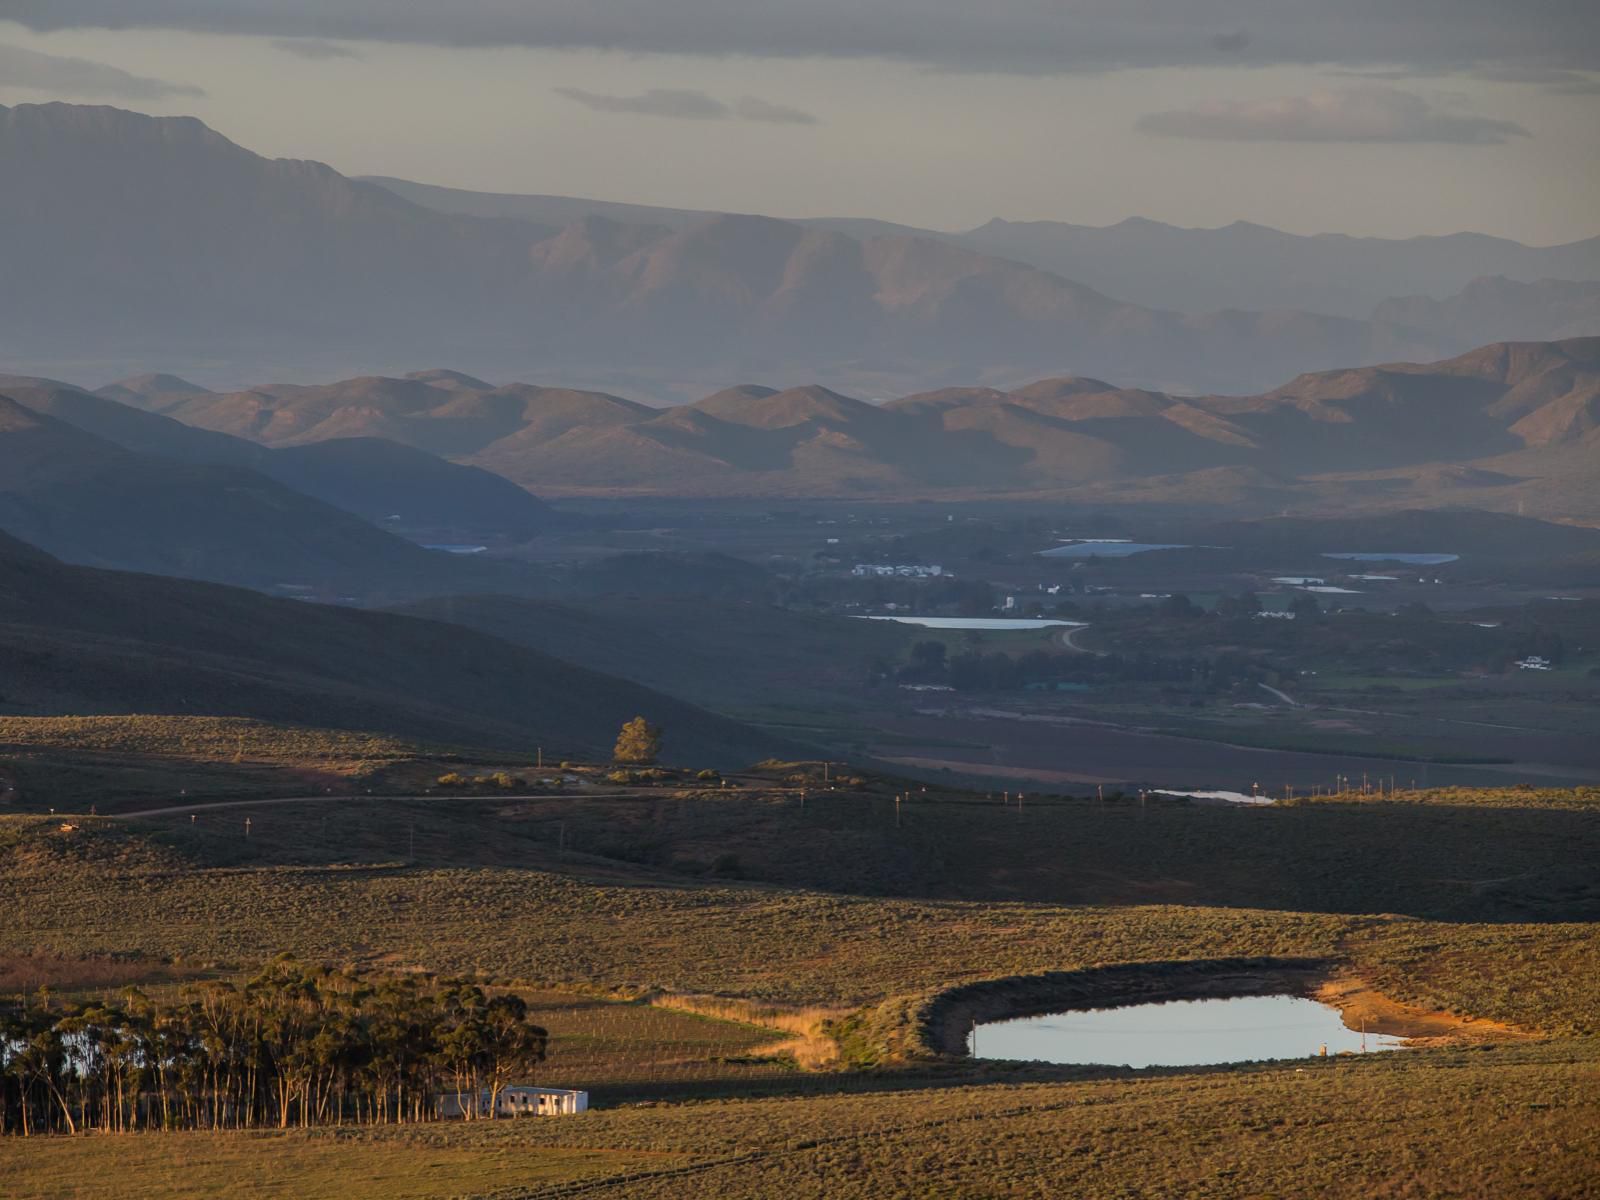 Lord S Wine Farm Boesmanskloof Mcgregor Western Cape South Africa Mountain, Nature, Highland